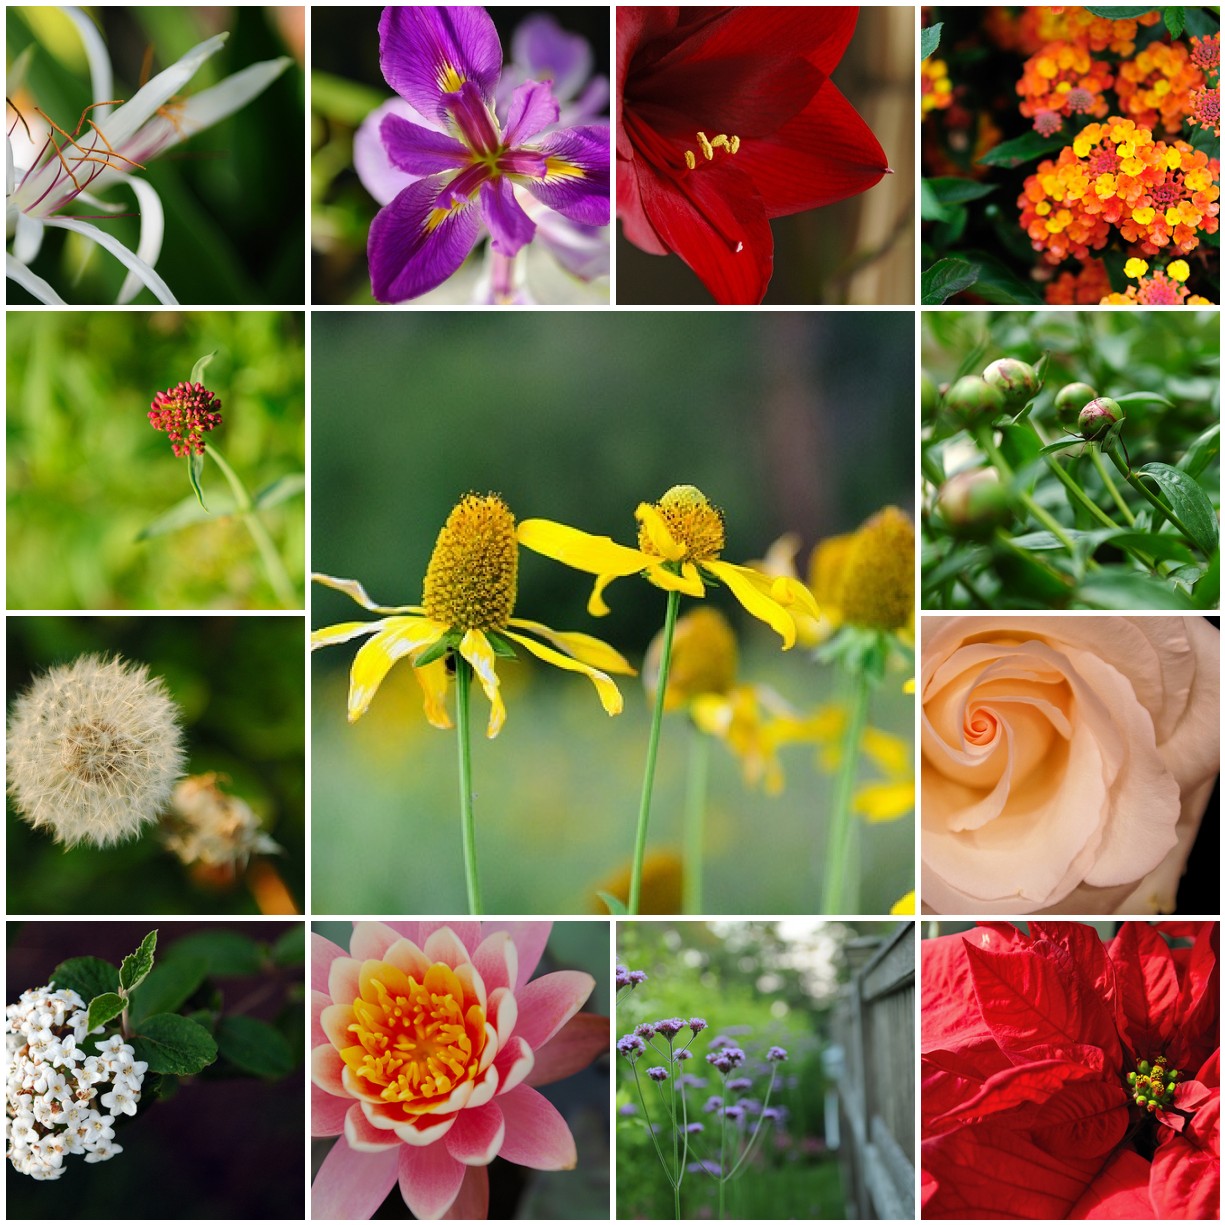 Mosaic Monday - Flower Collection